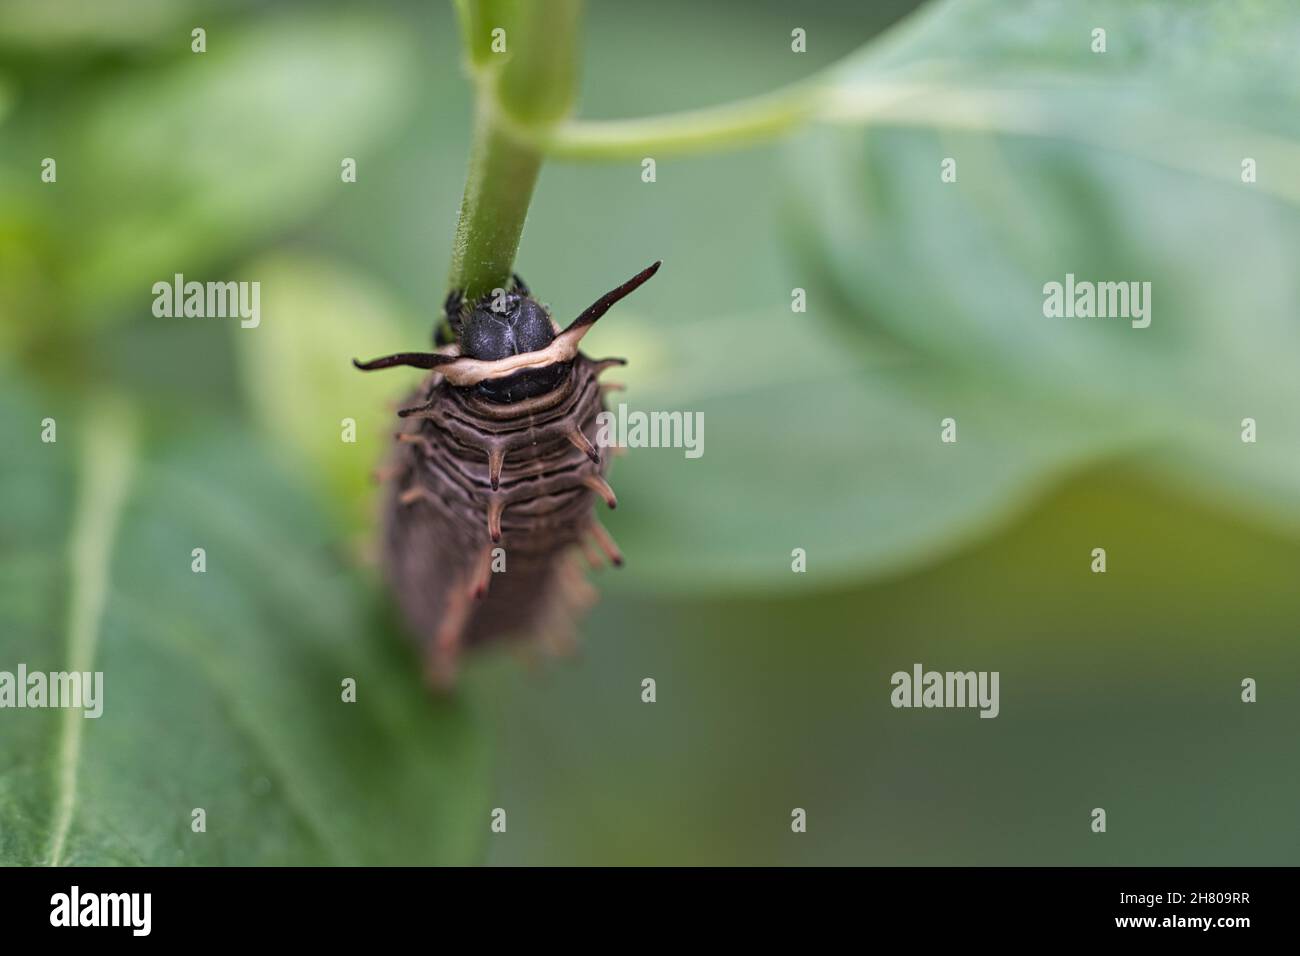 Caterpillar feeding on a leaf. a single animal close up. When they occur in large numbers, they are very harmful. Stock Photo